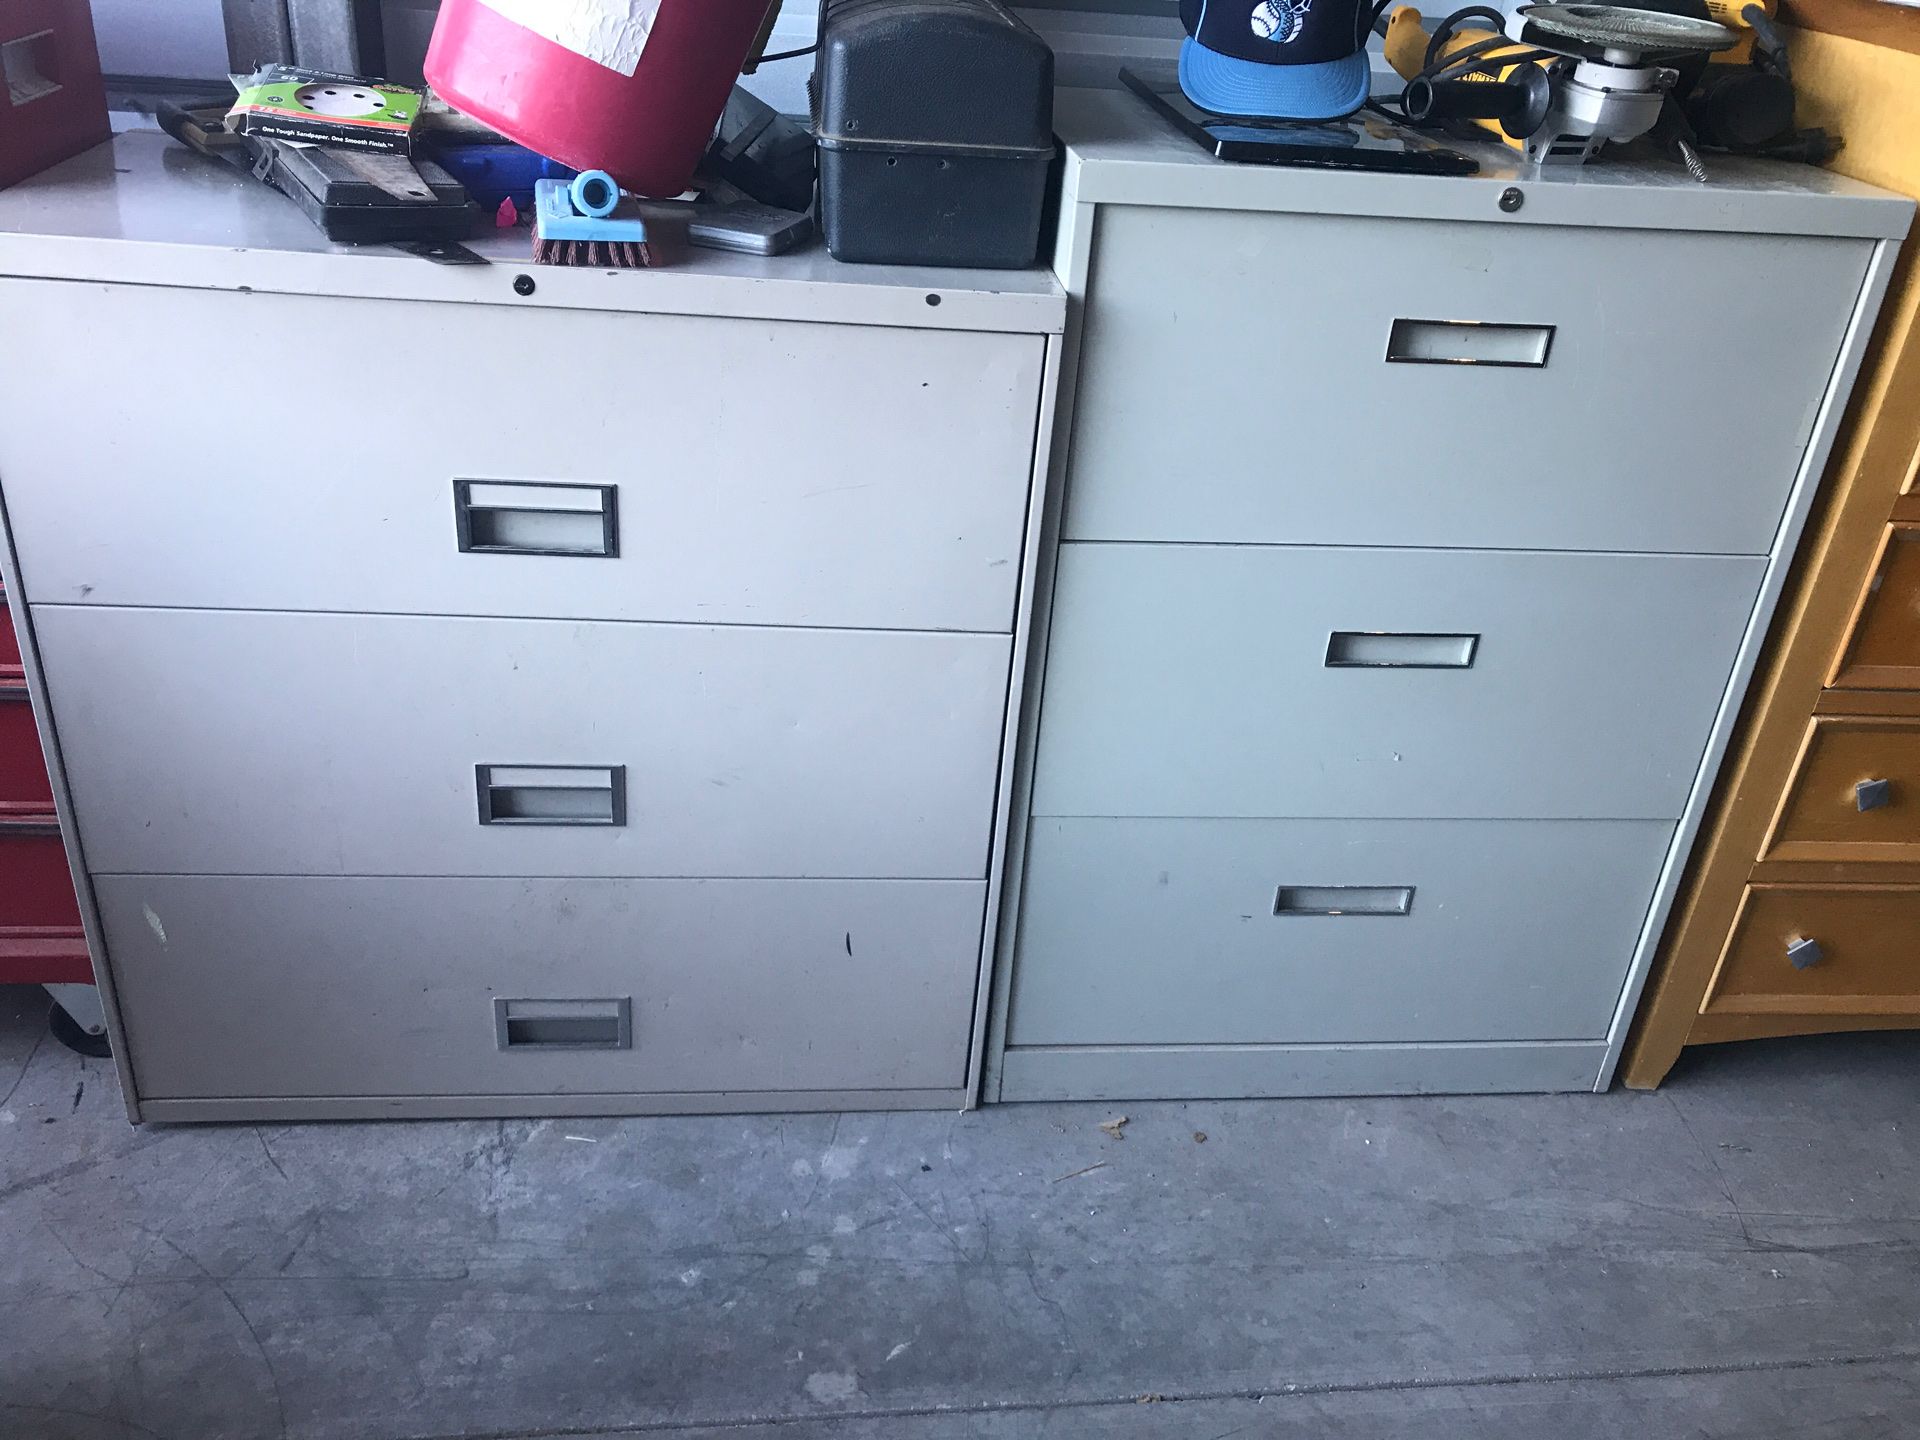 2 heavy duty lateral file cabinets. One36“ x 37“ x 18“. One30“ x 41“ x 18“. $35.00 for both or 20 each.